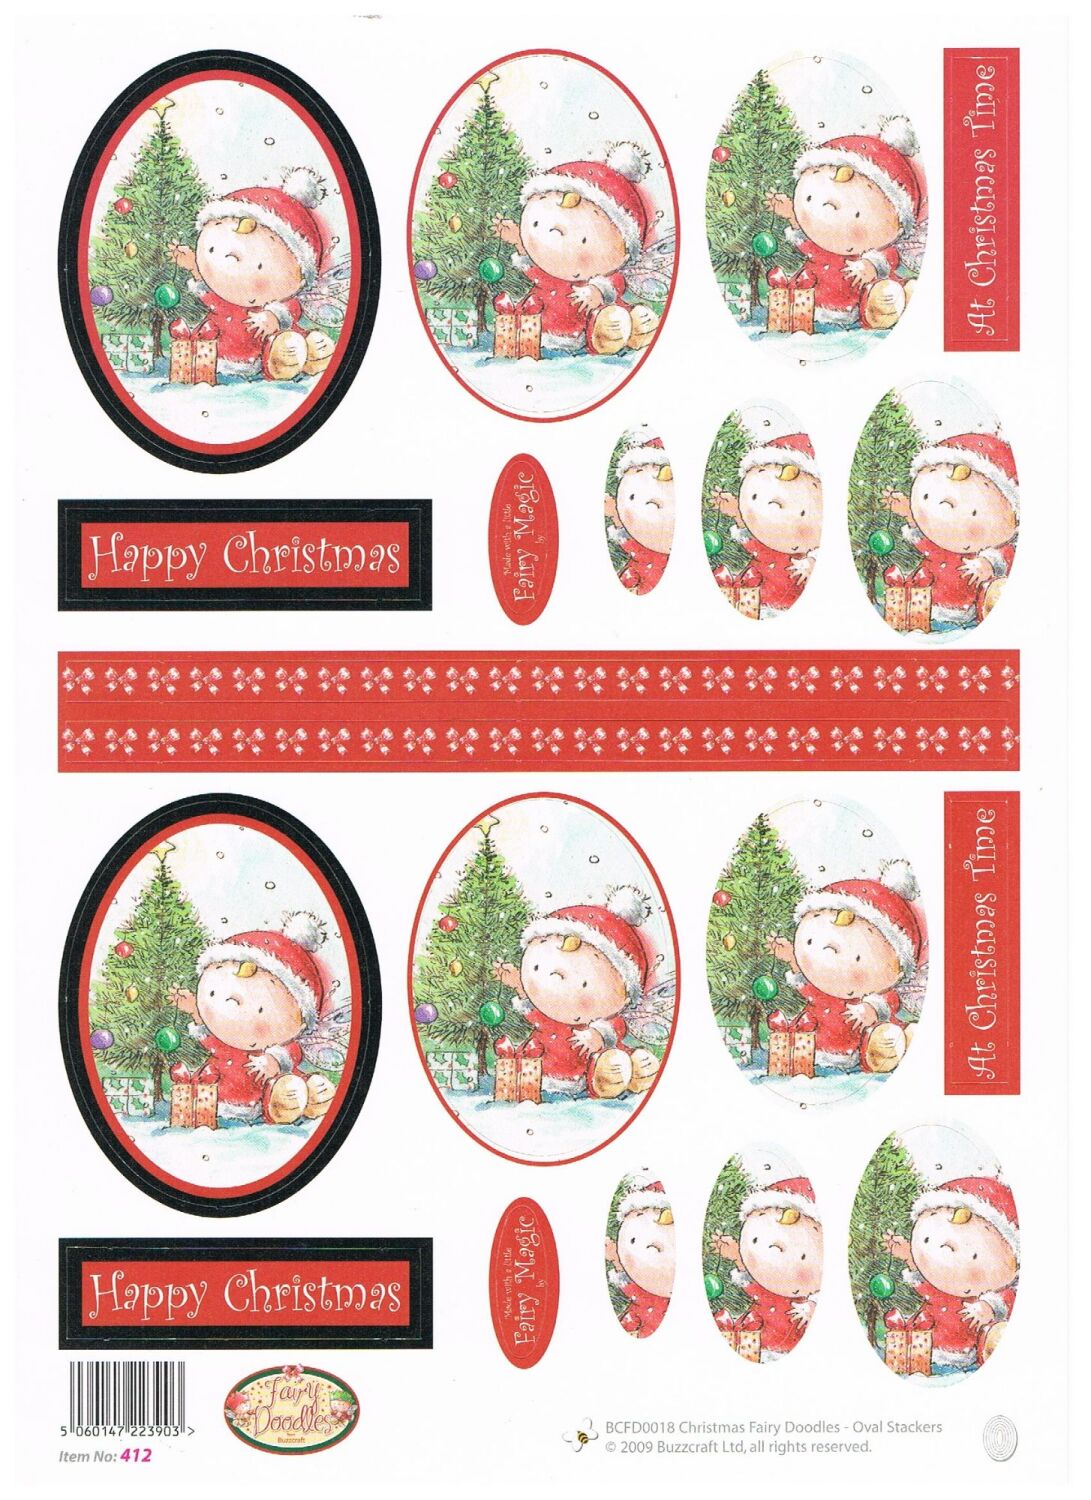 Round Christmas Pyramid decoupage toppers with sentiments and card ribbons